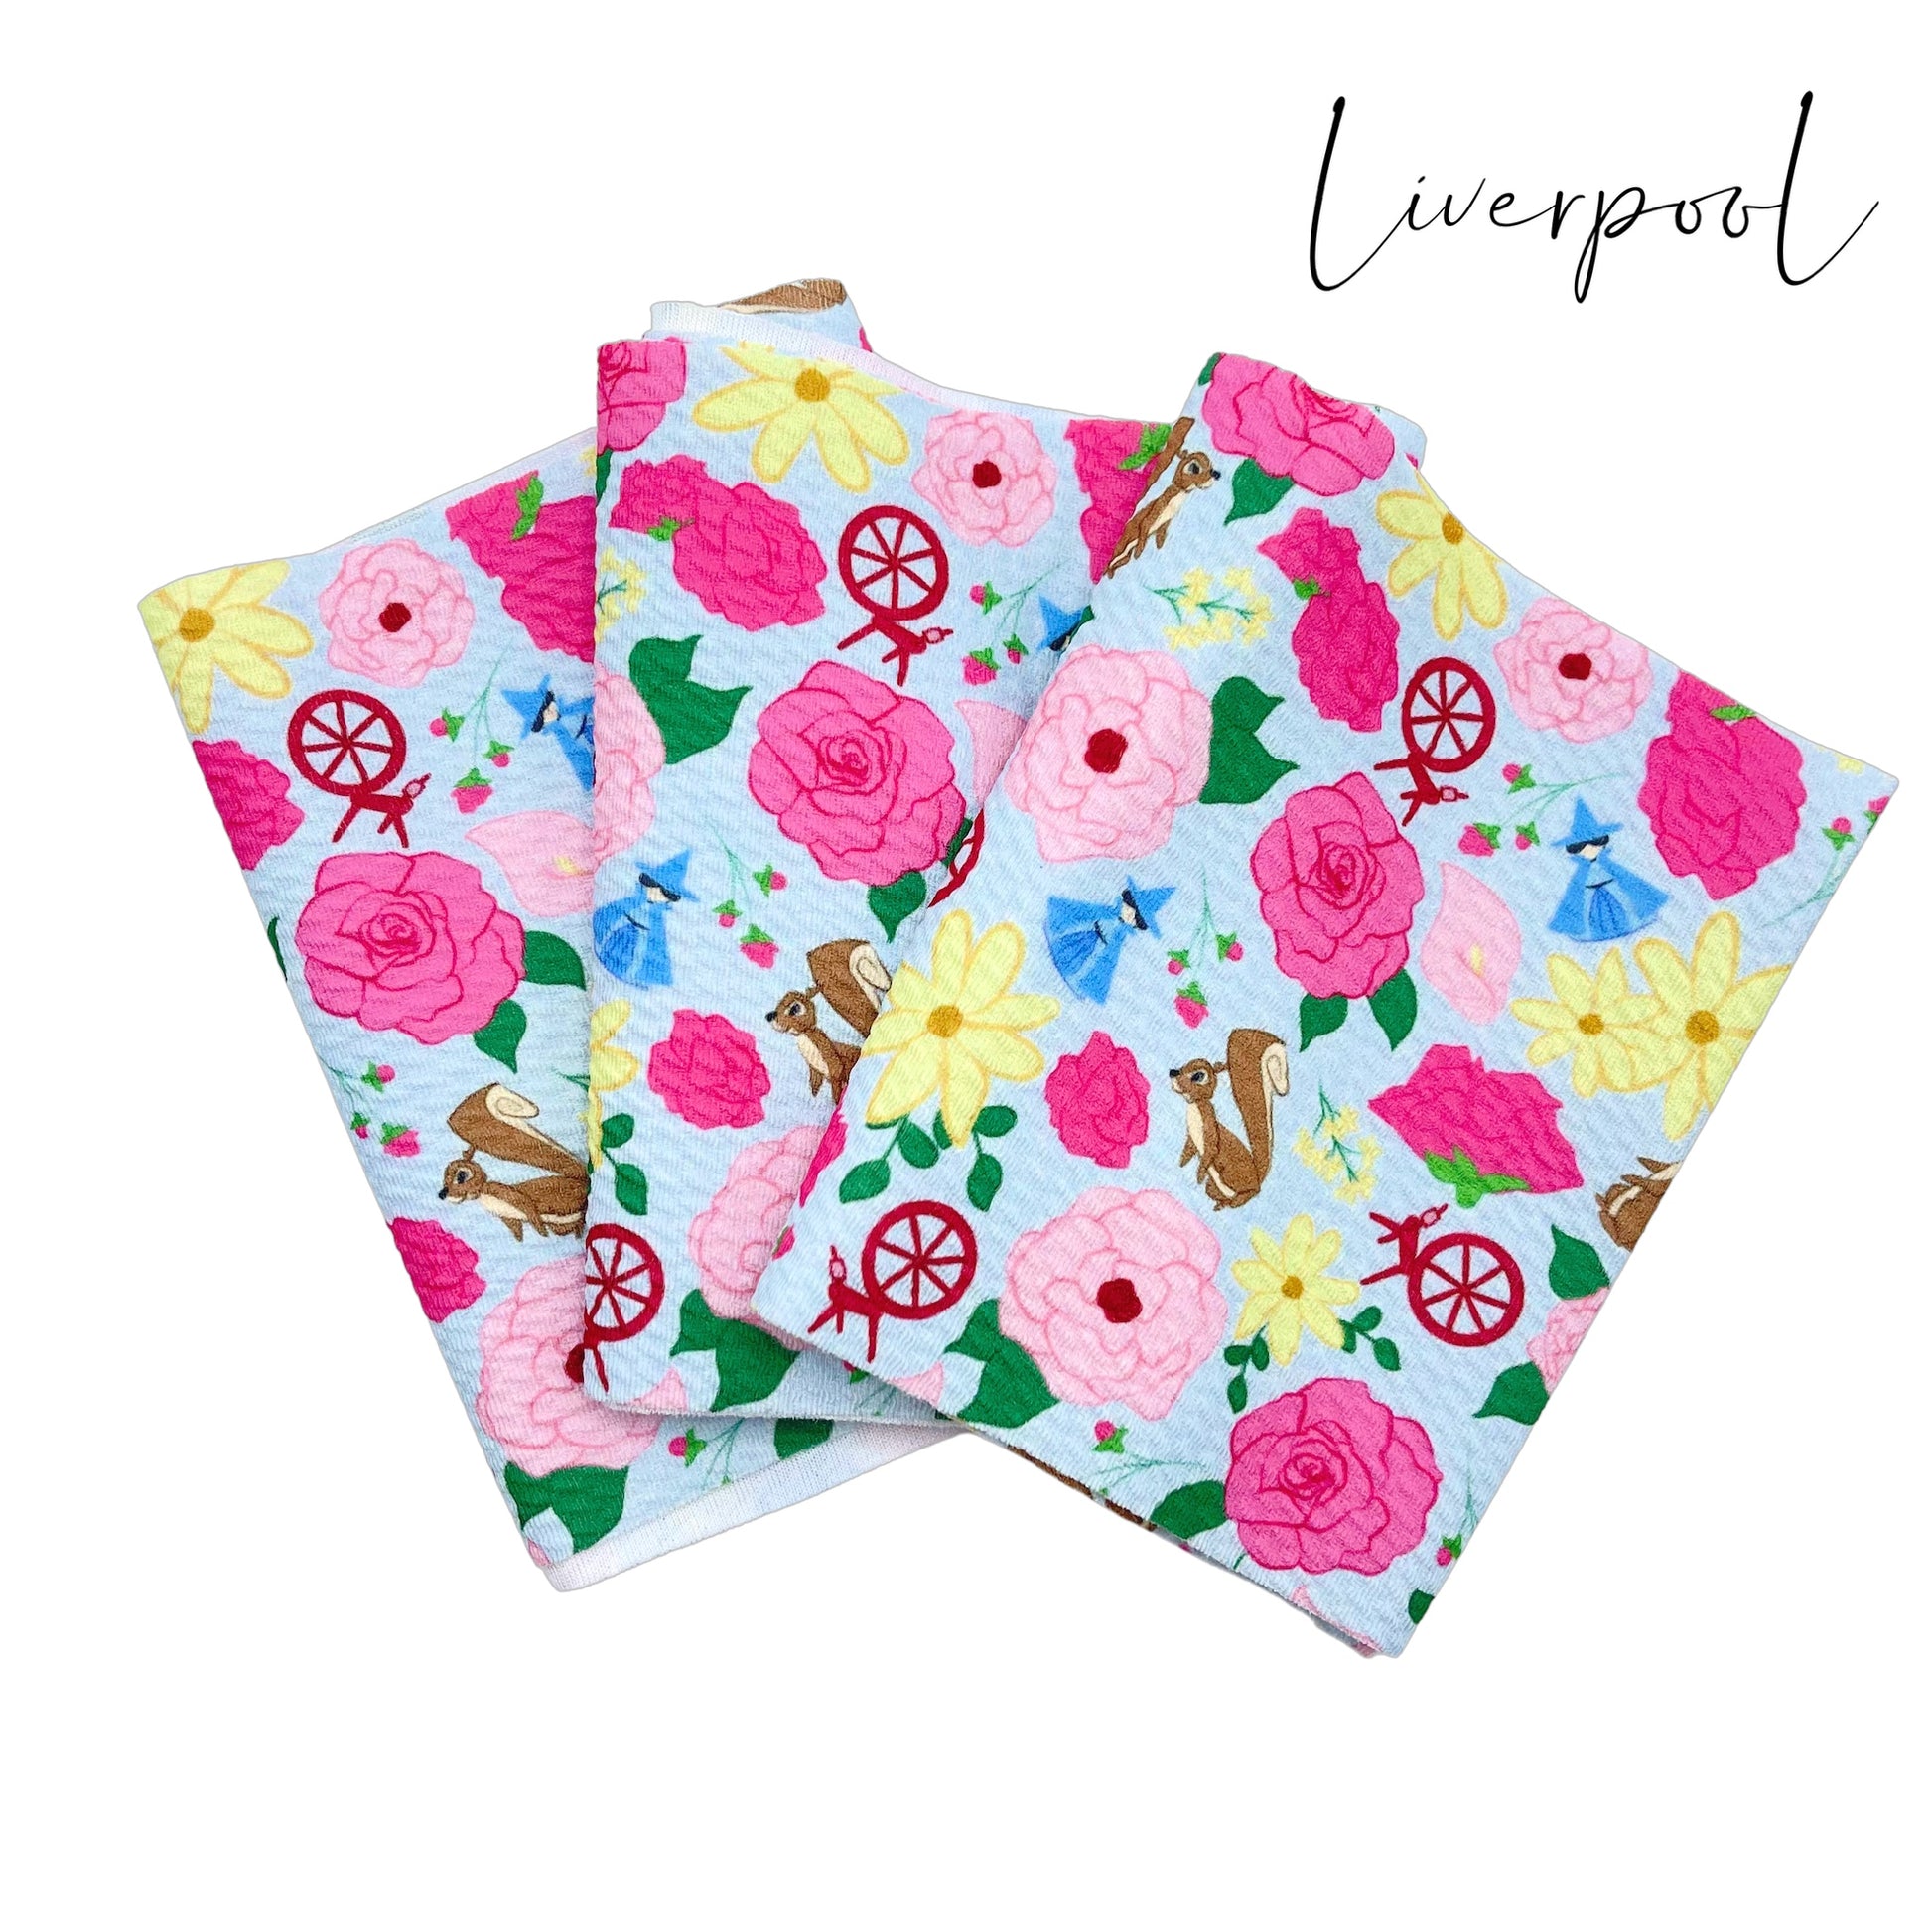 Folded light blue liverpool fabric with hot pink, light pink, and yellow floral princess pattern including squirrels, blue fairy, and spinning wheels.